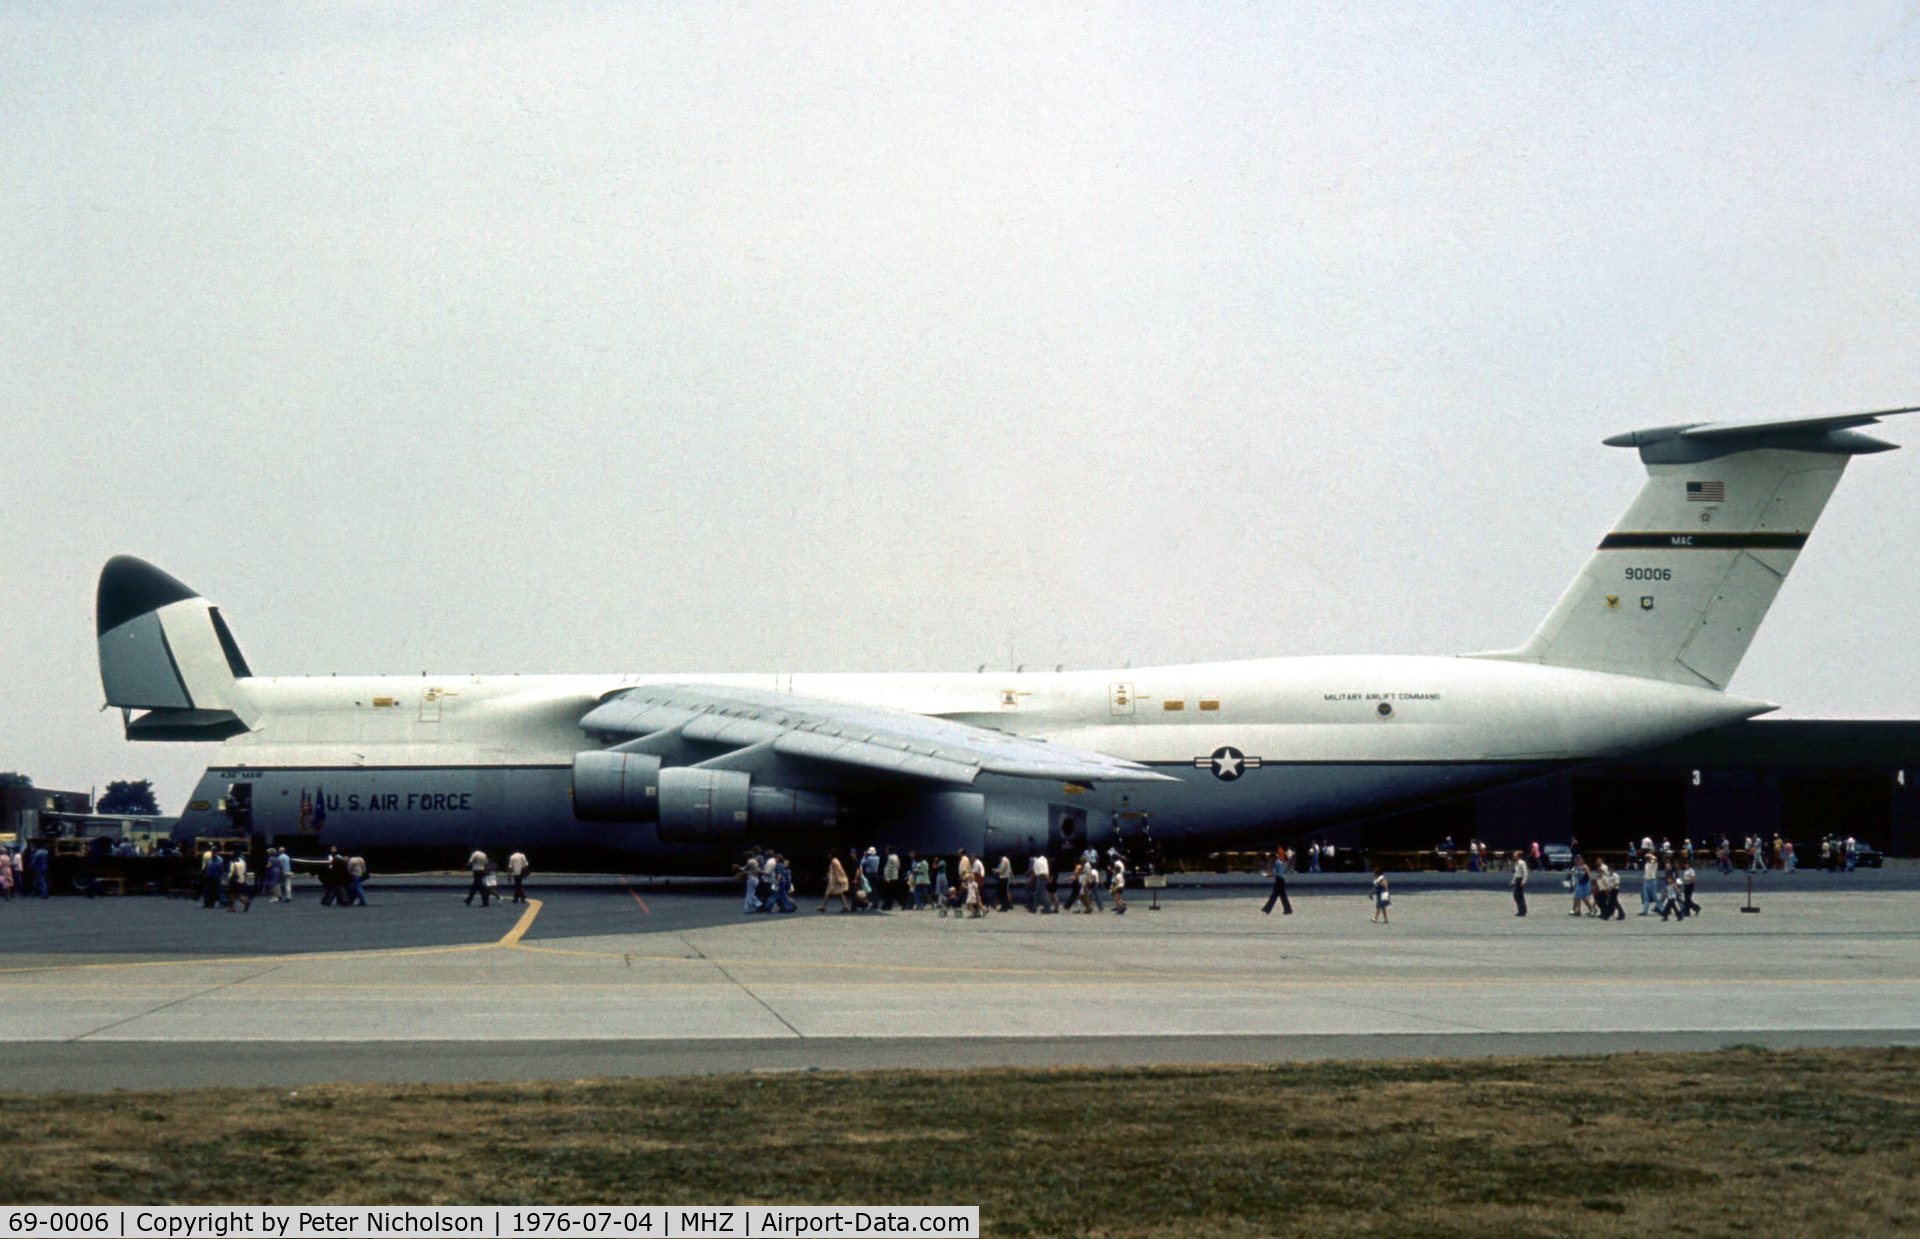 69-0006, 1969 Lockheed C-5A Galaxy C/N 500-0037, C-5A Galaxy of 436th Military Airlift Wing at the 1976 Mildenhall Air Fete.